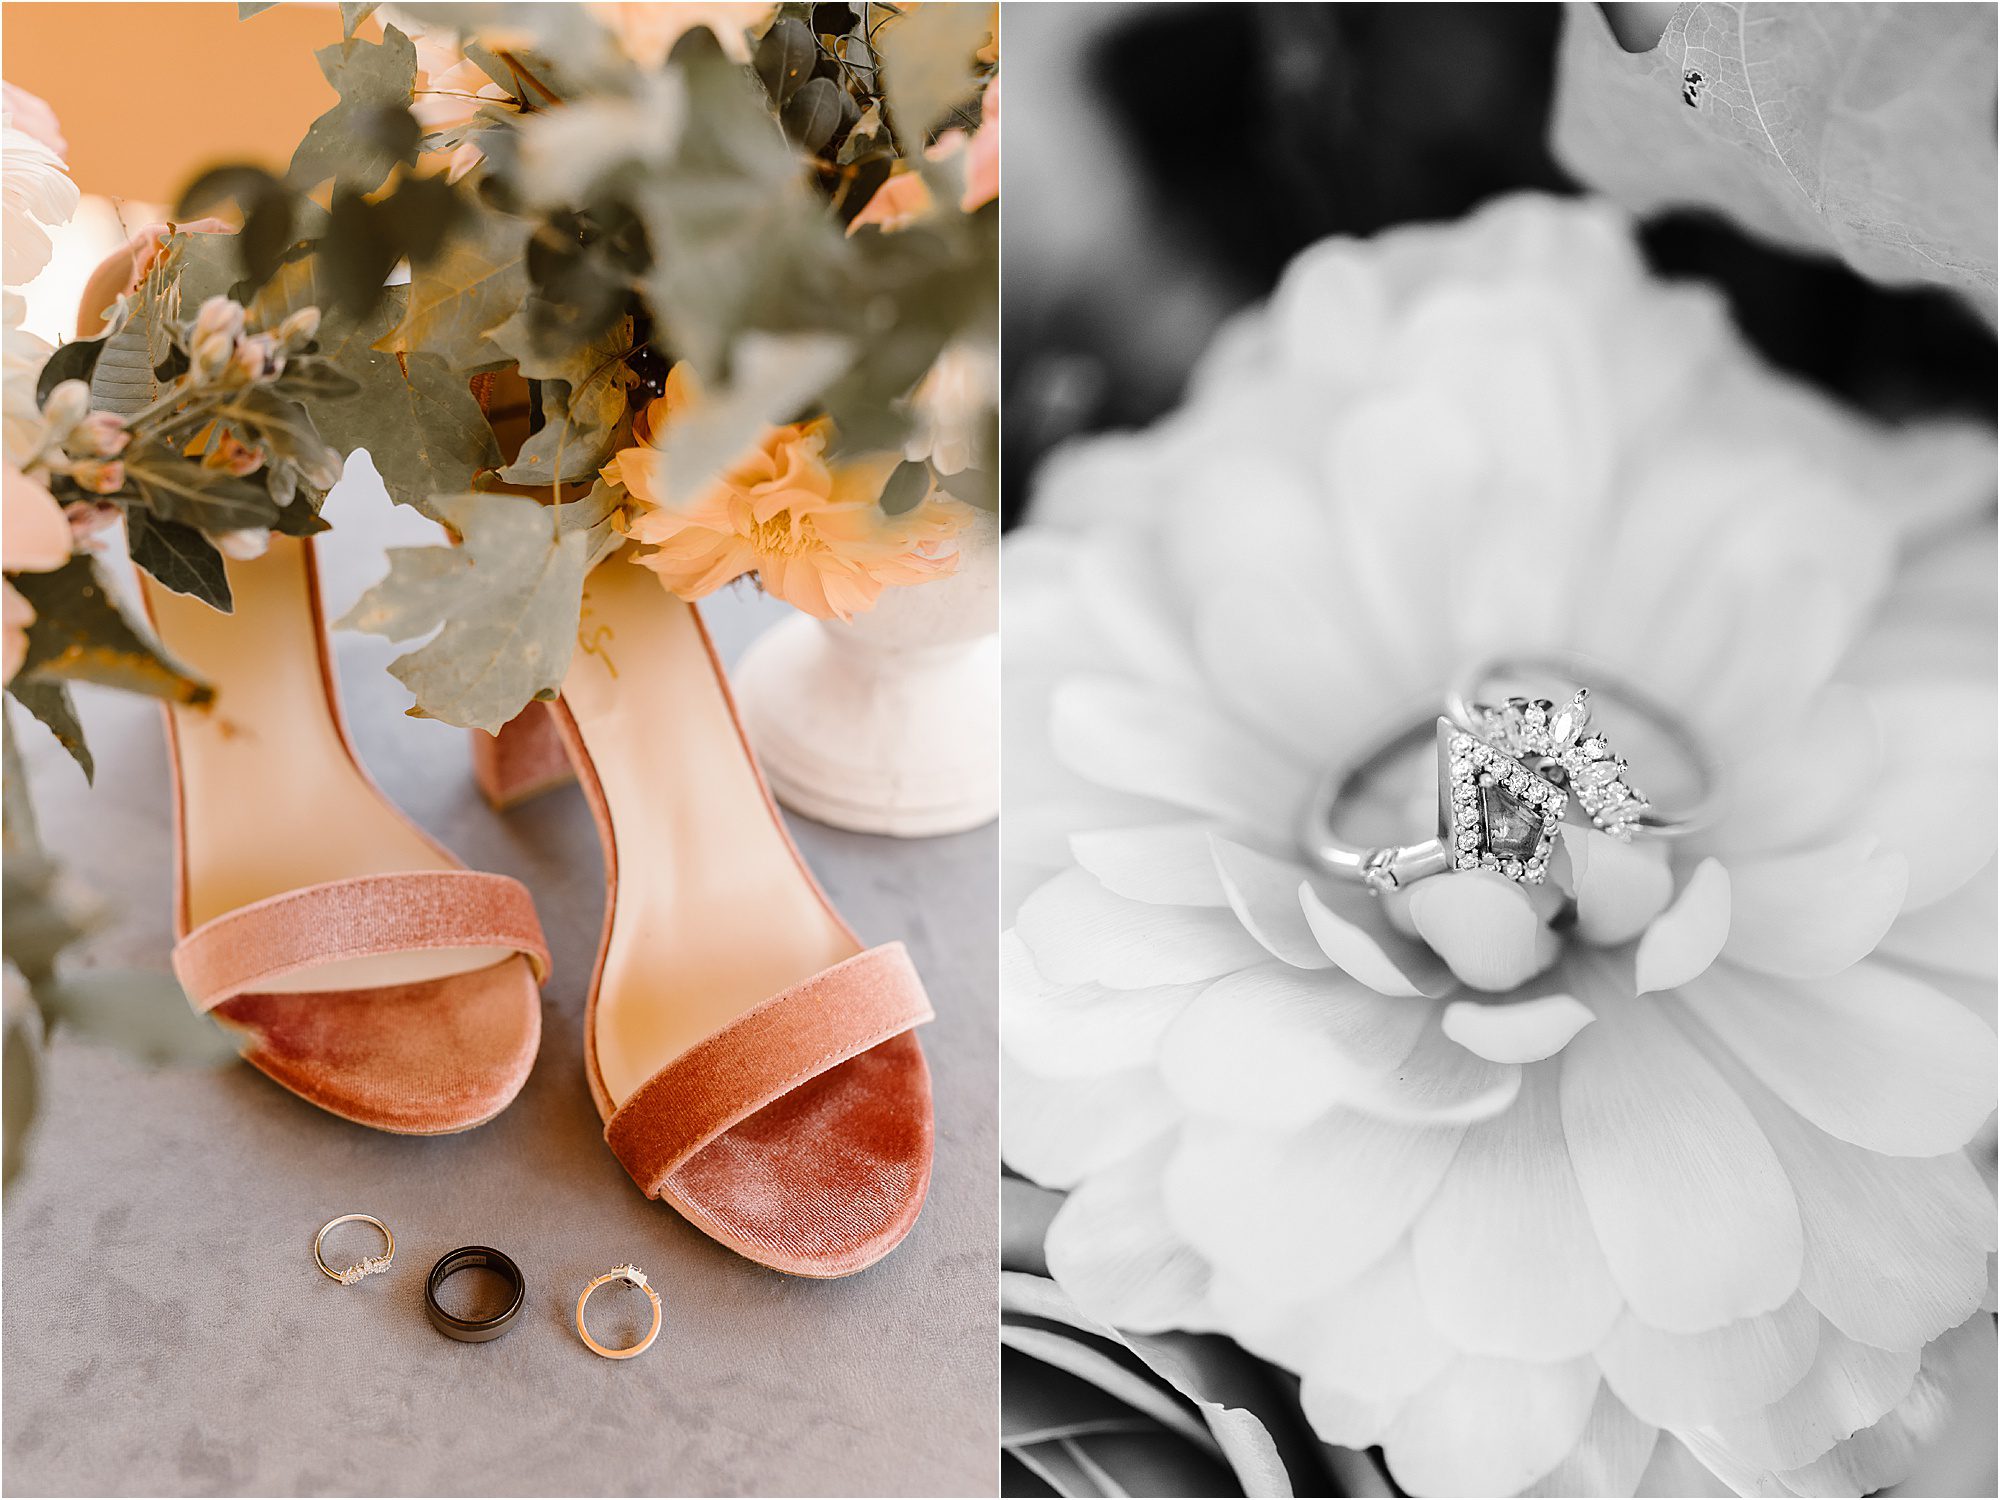 velvet pink wedding shoes with wedding rings